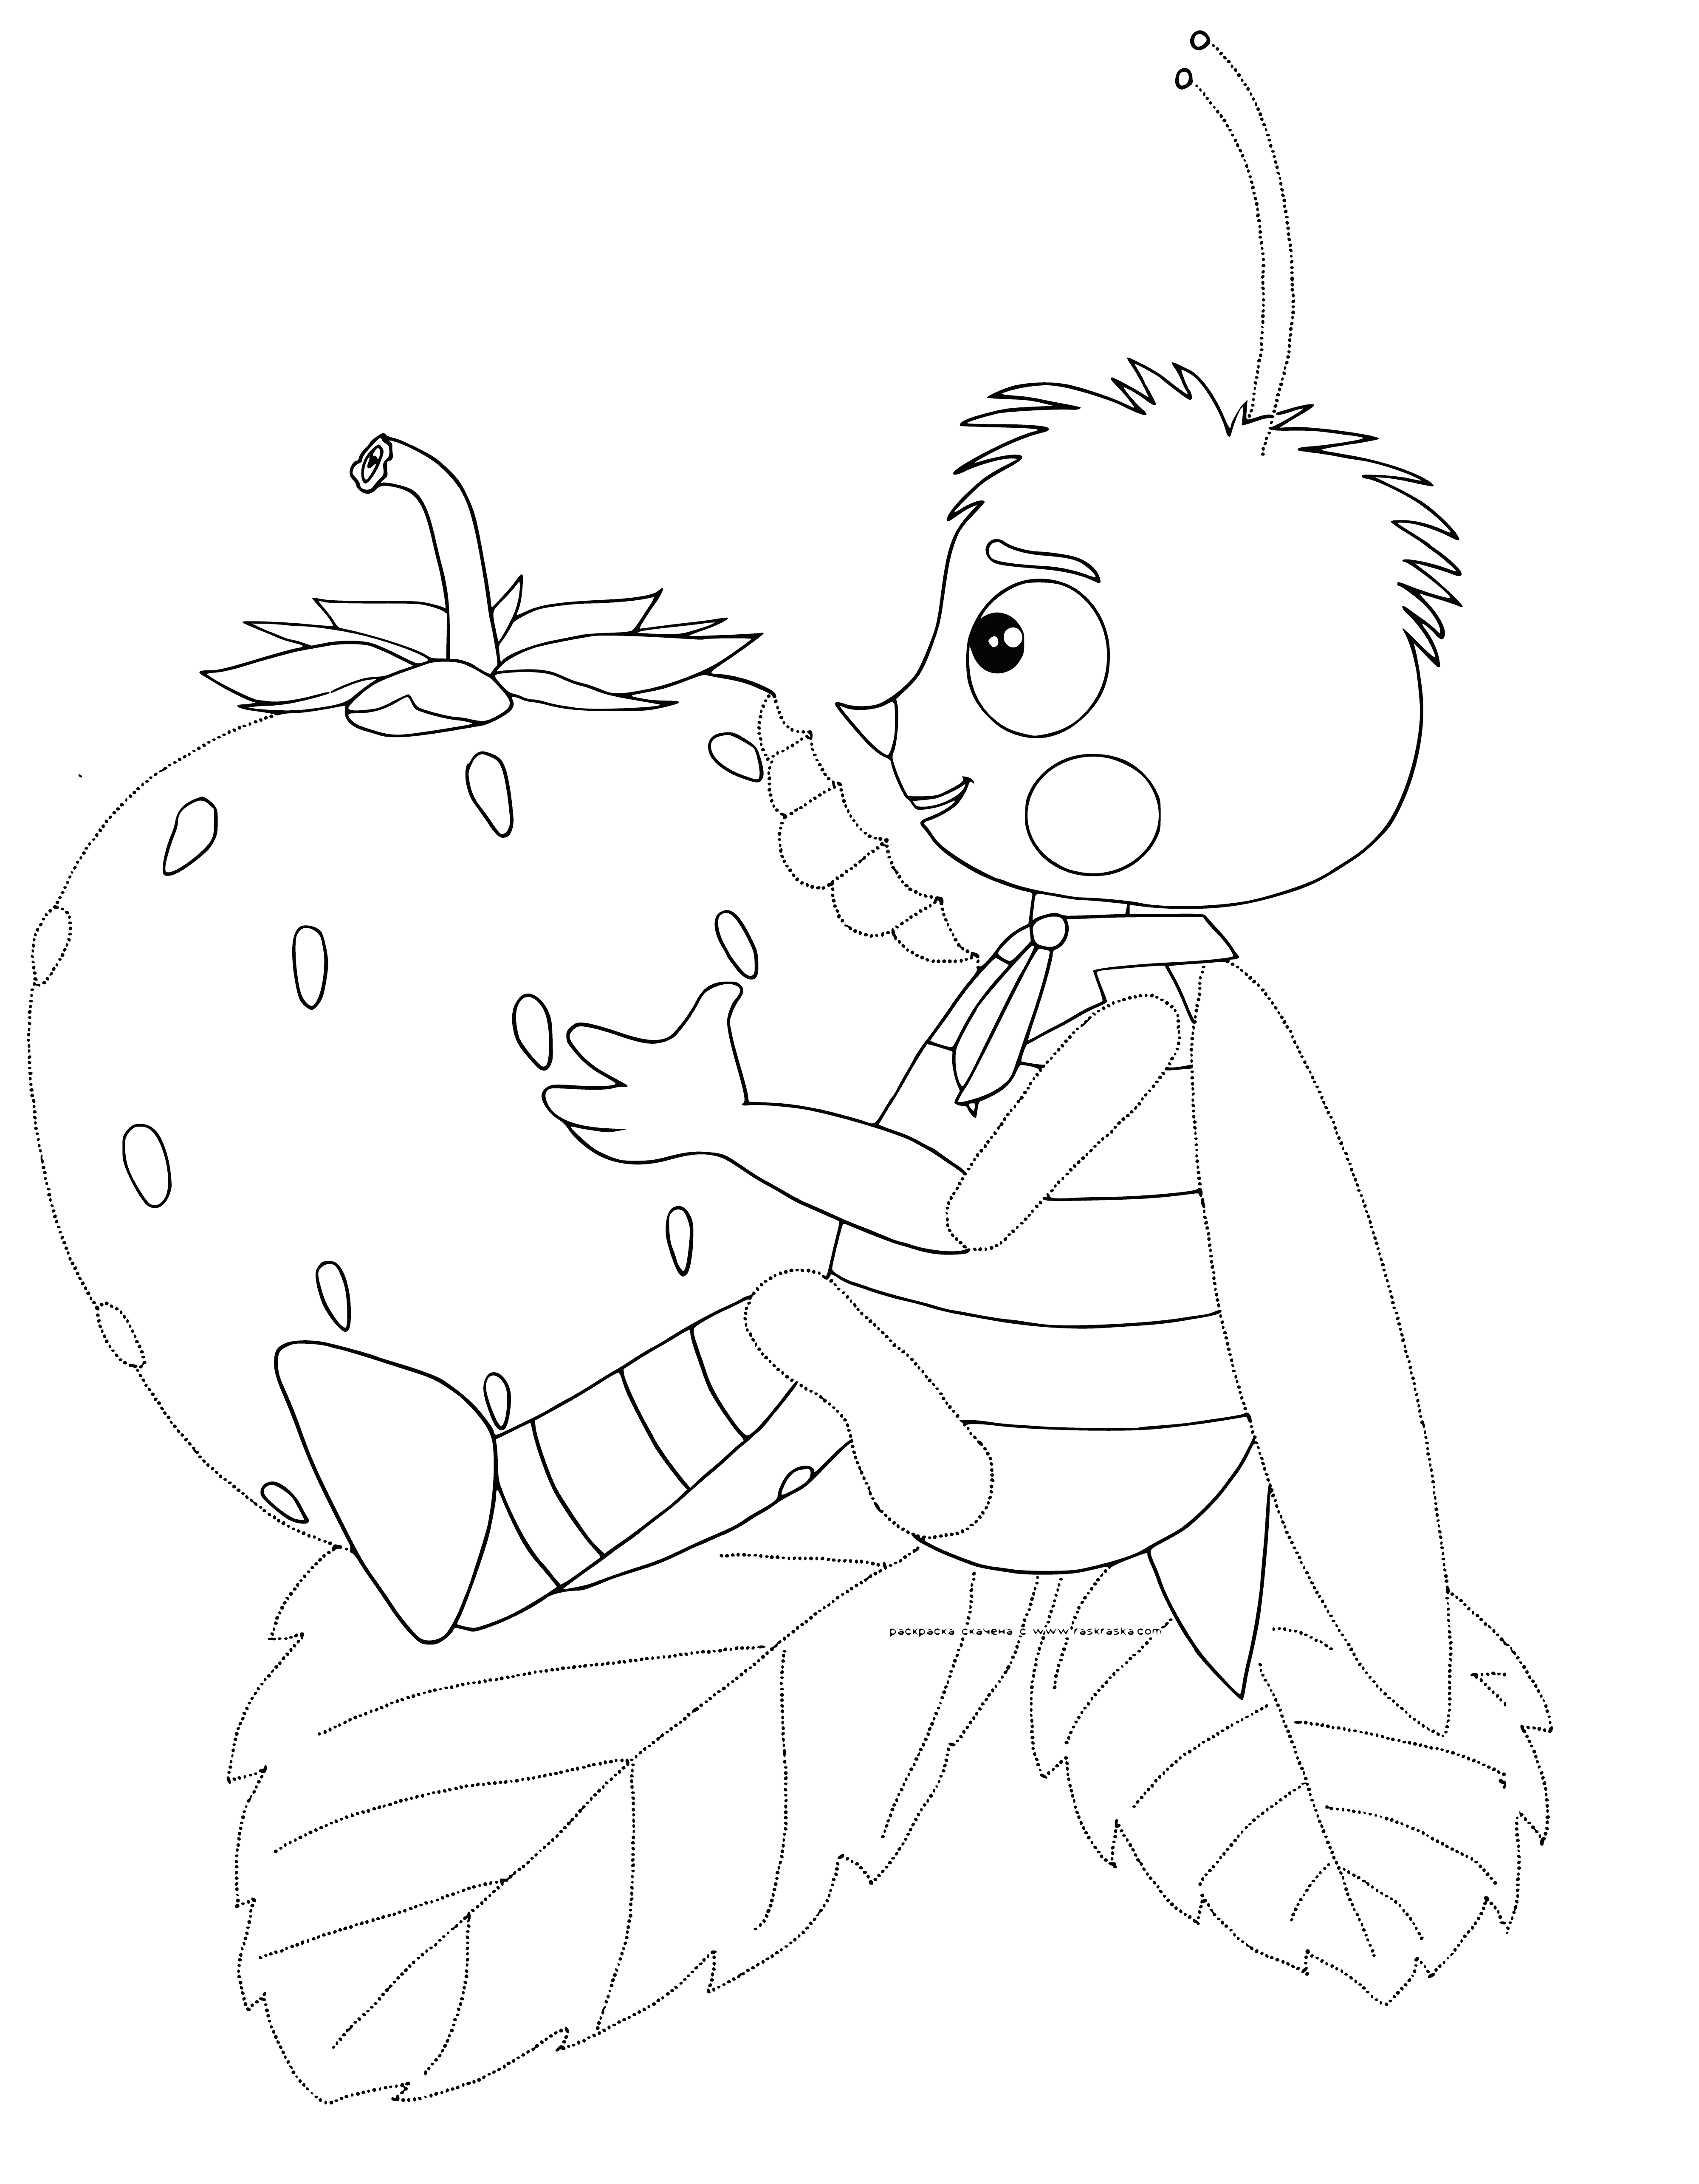 coloring page: Luntik, a light-colored creature, is in the center of the page, with a bee with a red strawberry and a mouse with long ears on either side.